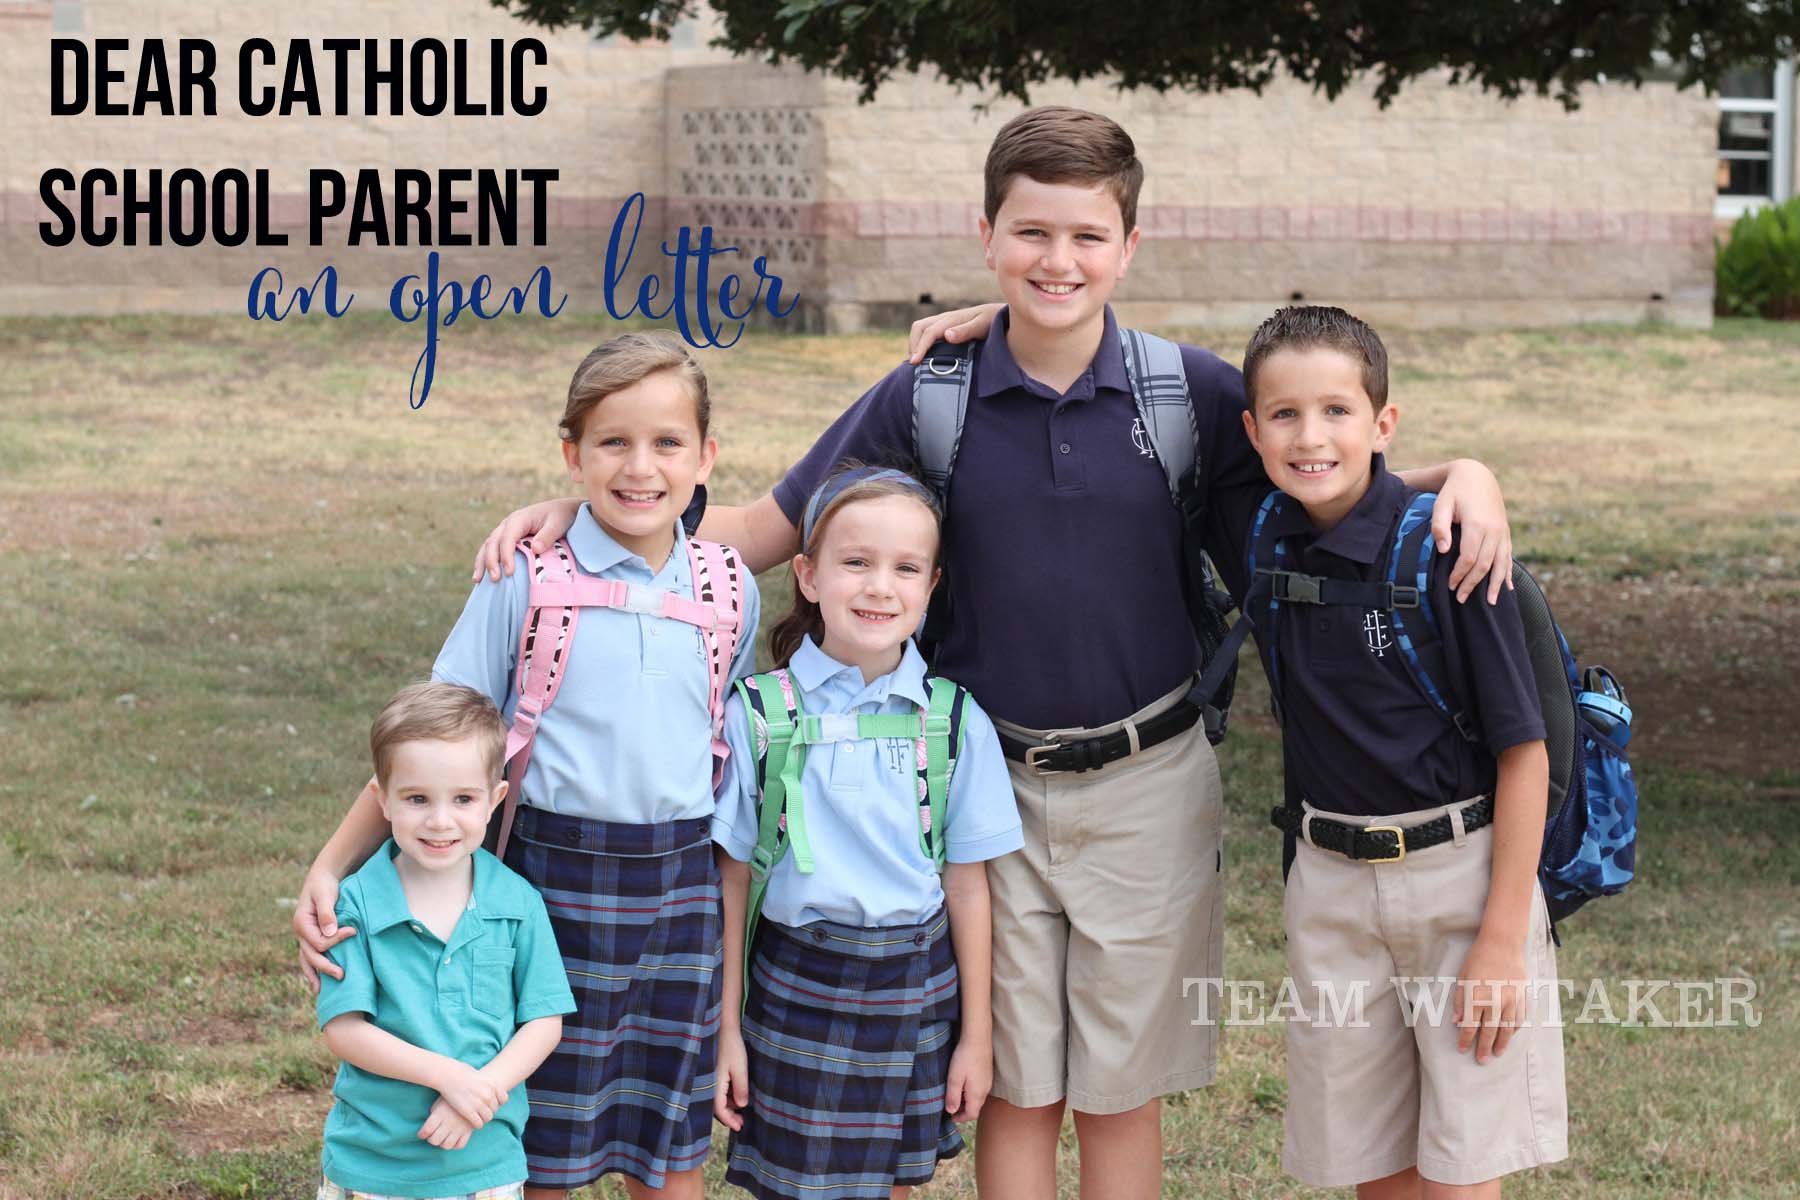 Considering Catholic school for your children? This letter speaks to why it's such an important decision and how it might be the right choice for your family.